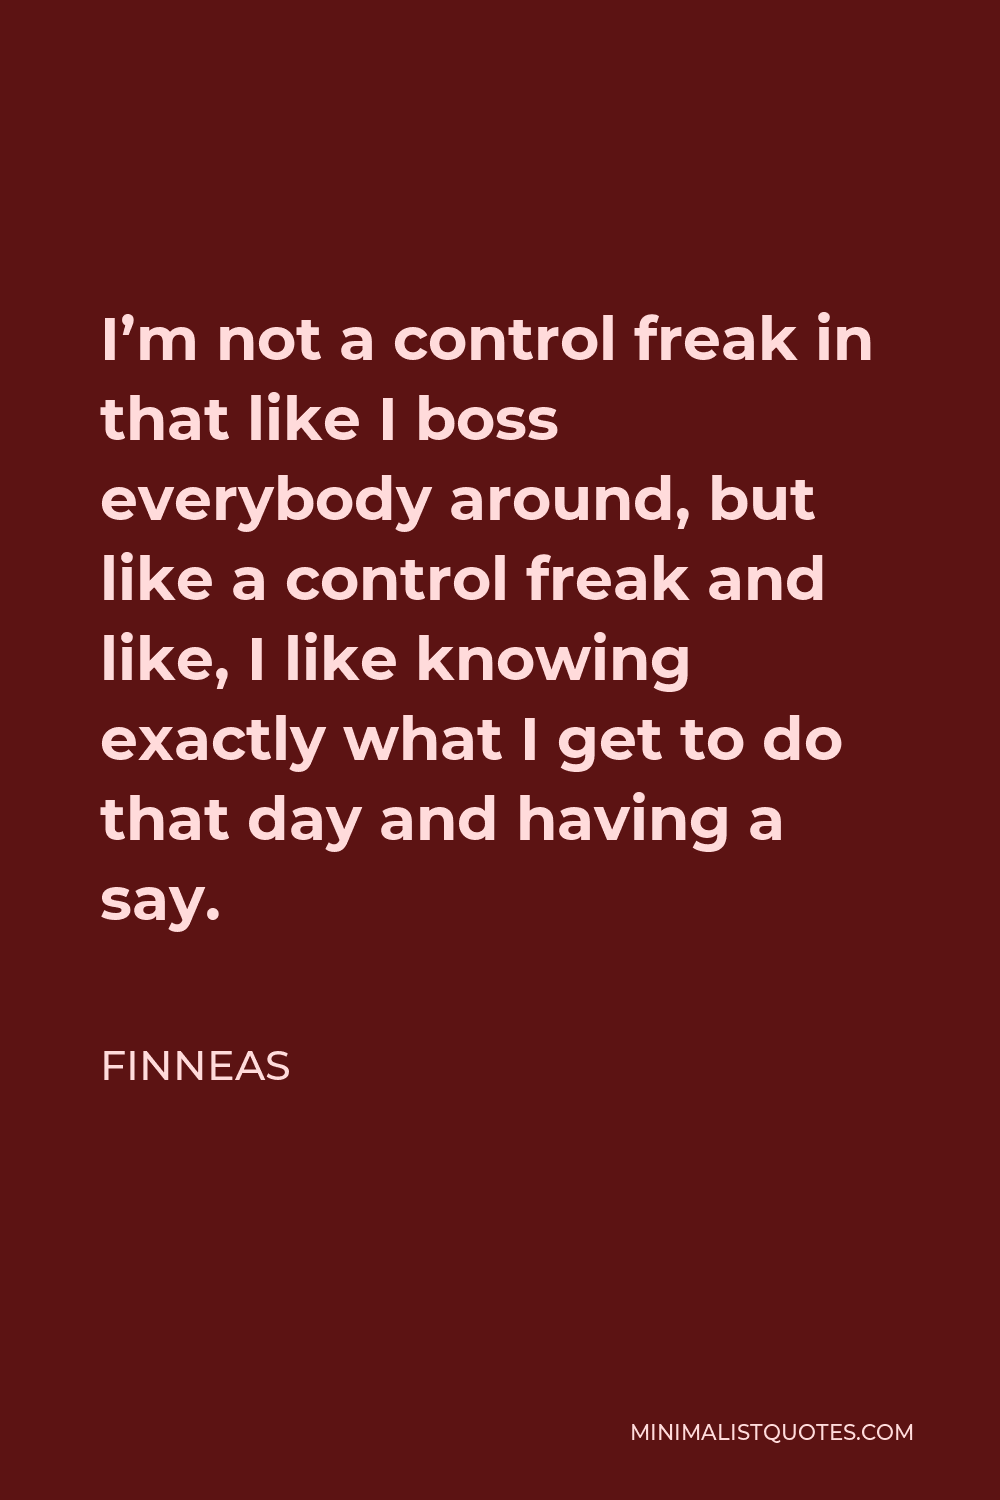 Finneas Quote - I’m not a control freak in that like I boss everybody around, but like a control freak and like, I like knowing exactly what I get to do that day and having a say.